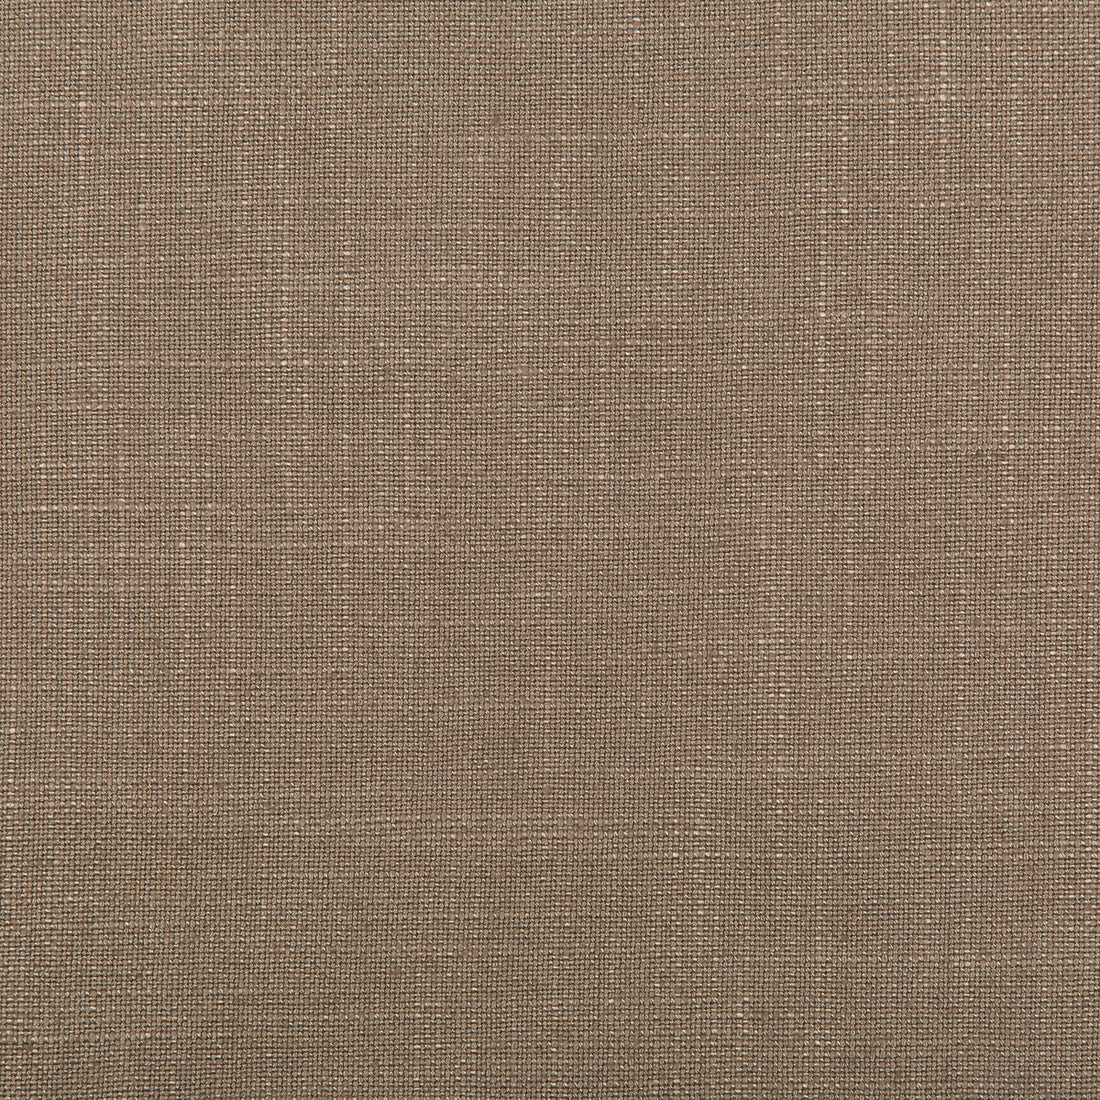 Aura fabric in fawn color - pattern 35520.106.0 - by Kravet Design